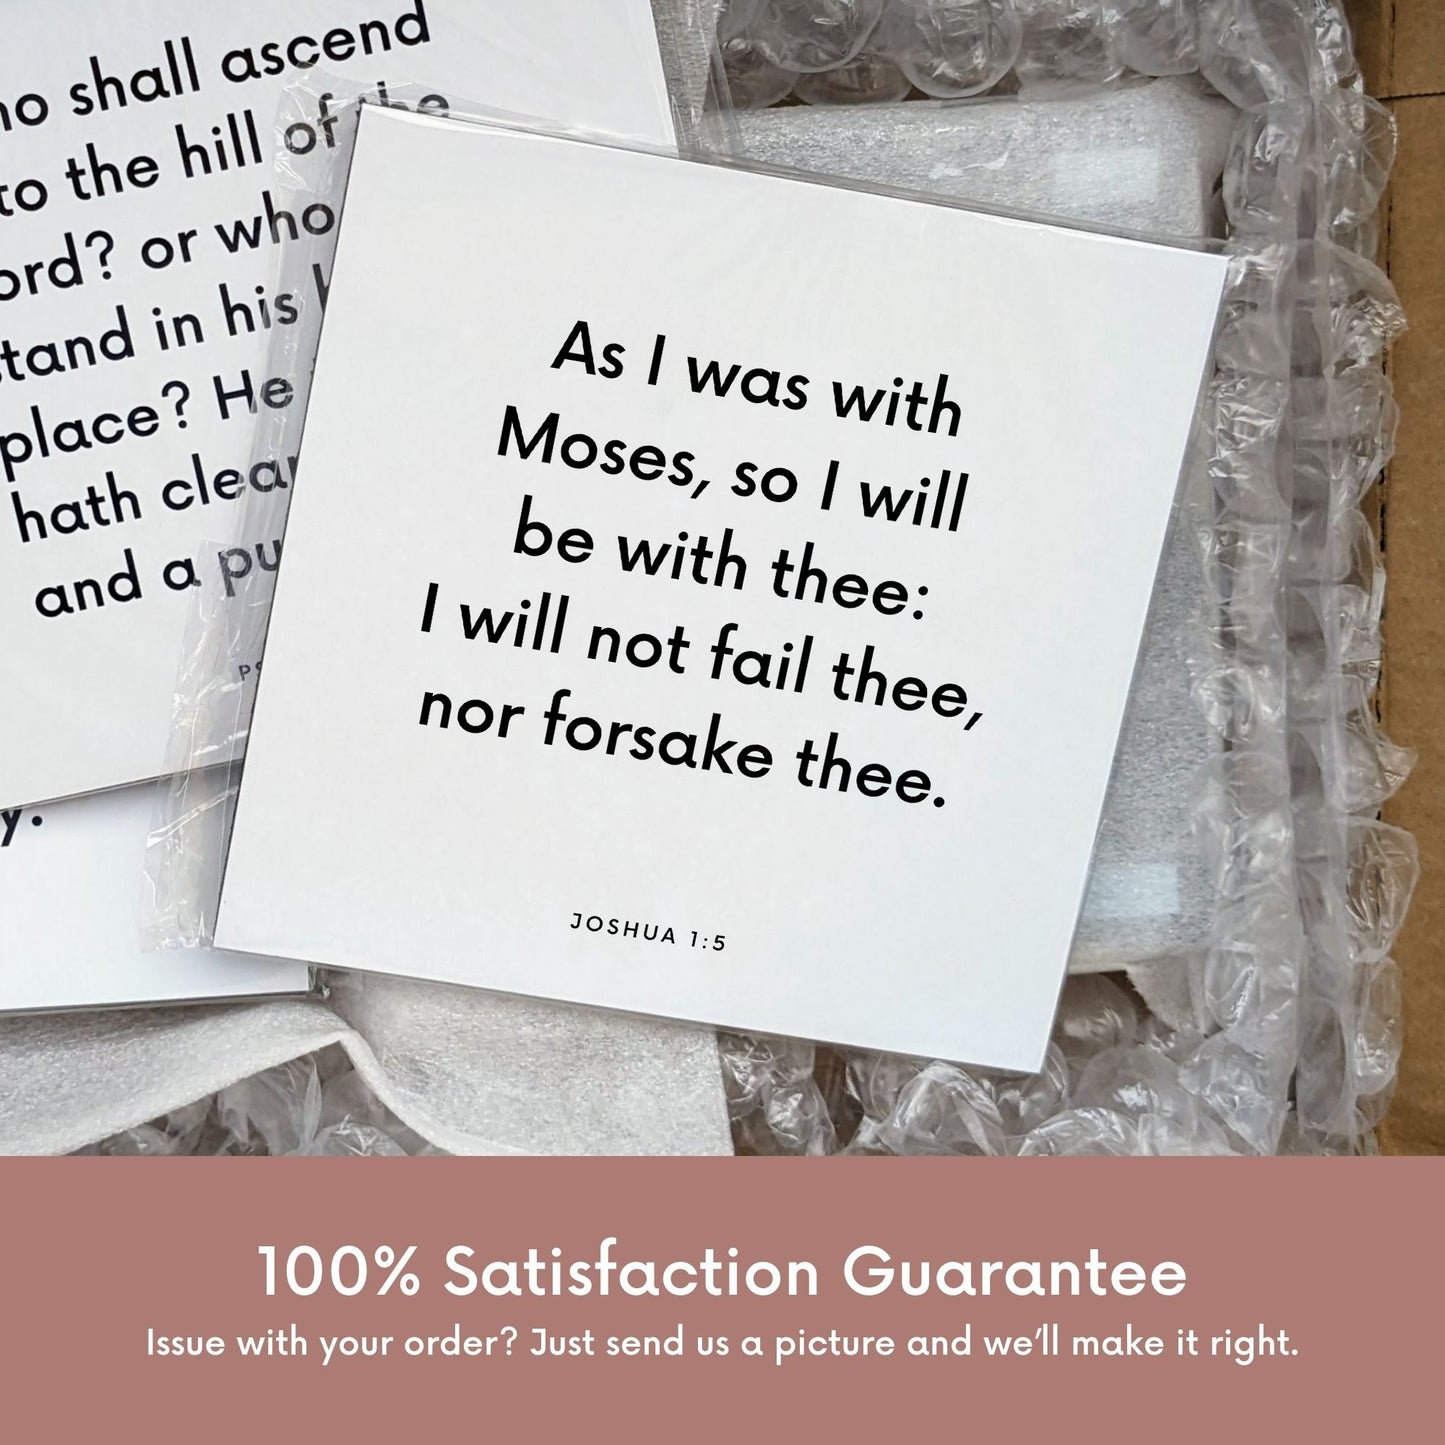 Shipping materials for scripture tile of Joshua 1:5 - "I will not fail thee, nor forsake thee"